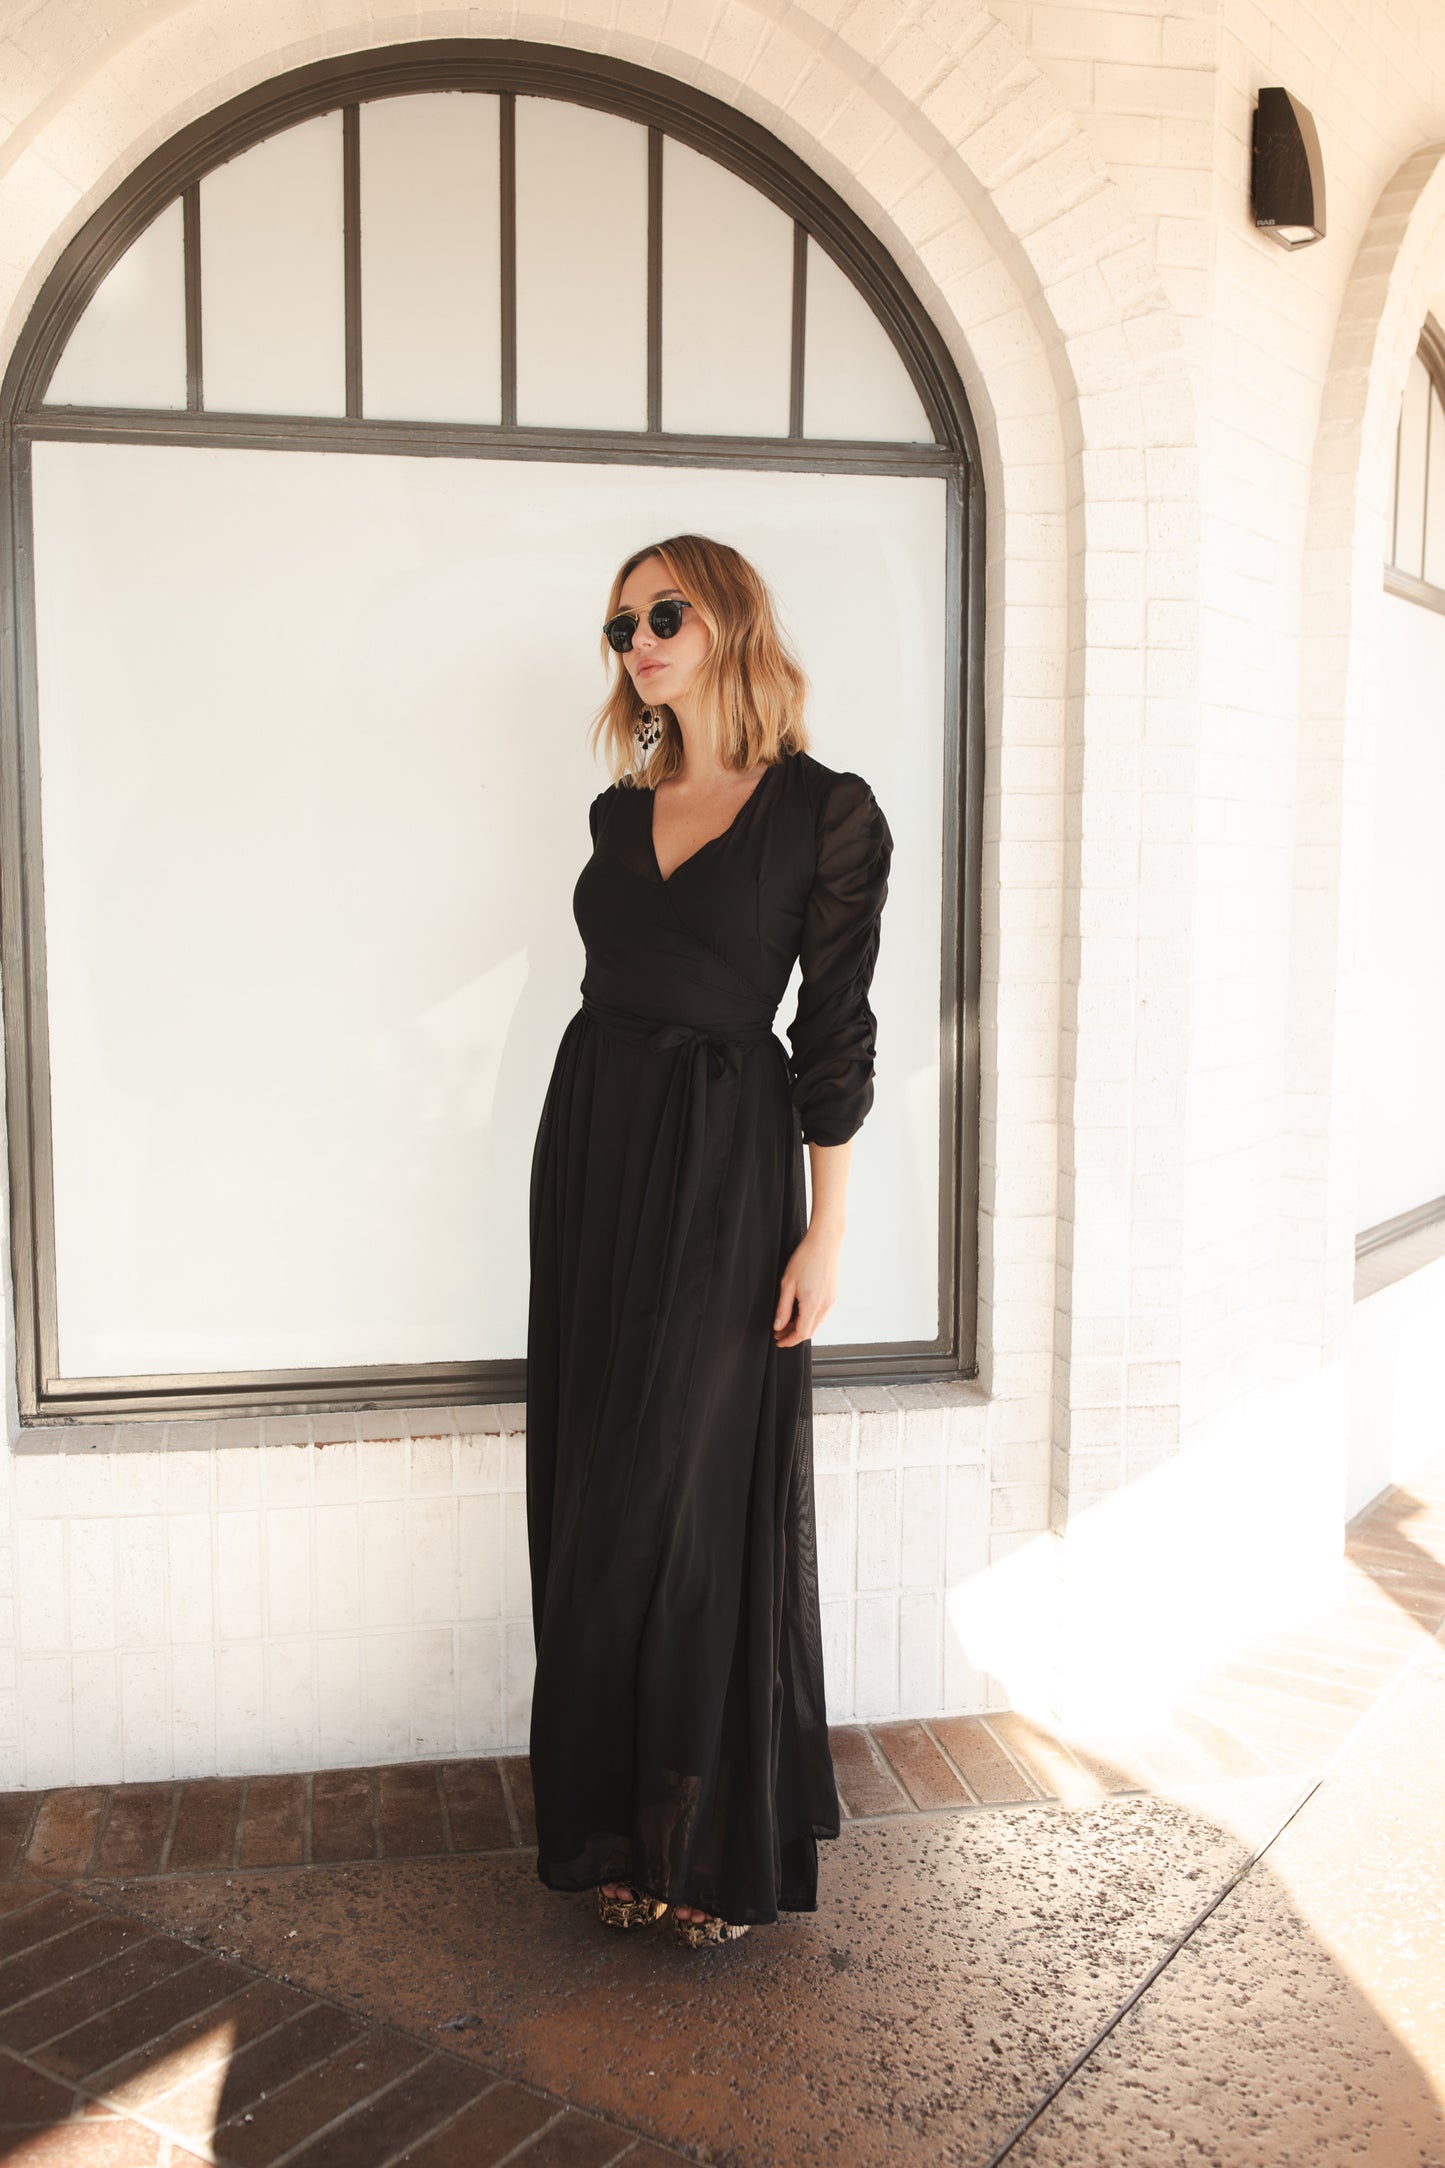 Semi-sheer black maxi dress. The dress features a wrap front, v-neck, three-quarter sleeve with ruching detail, and a matching black slip dress underneath. Classic, vintage inspired black maxi dress with a gothic flair.